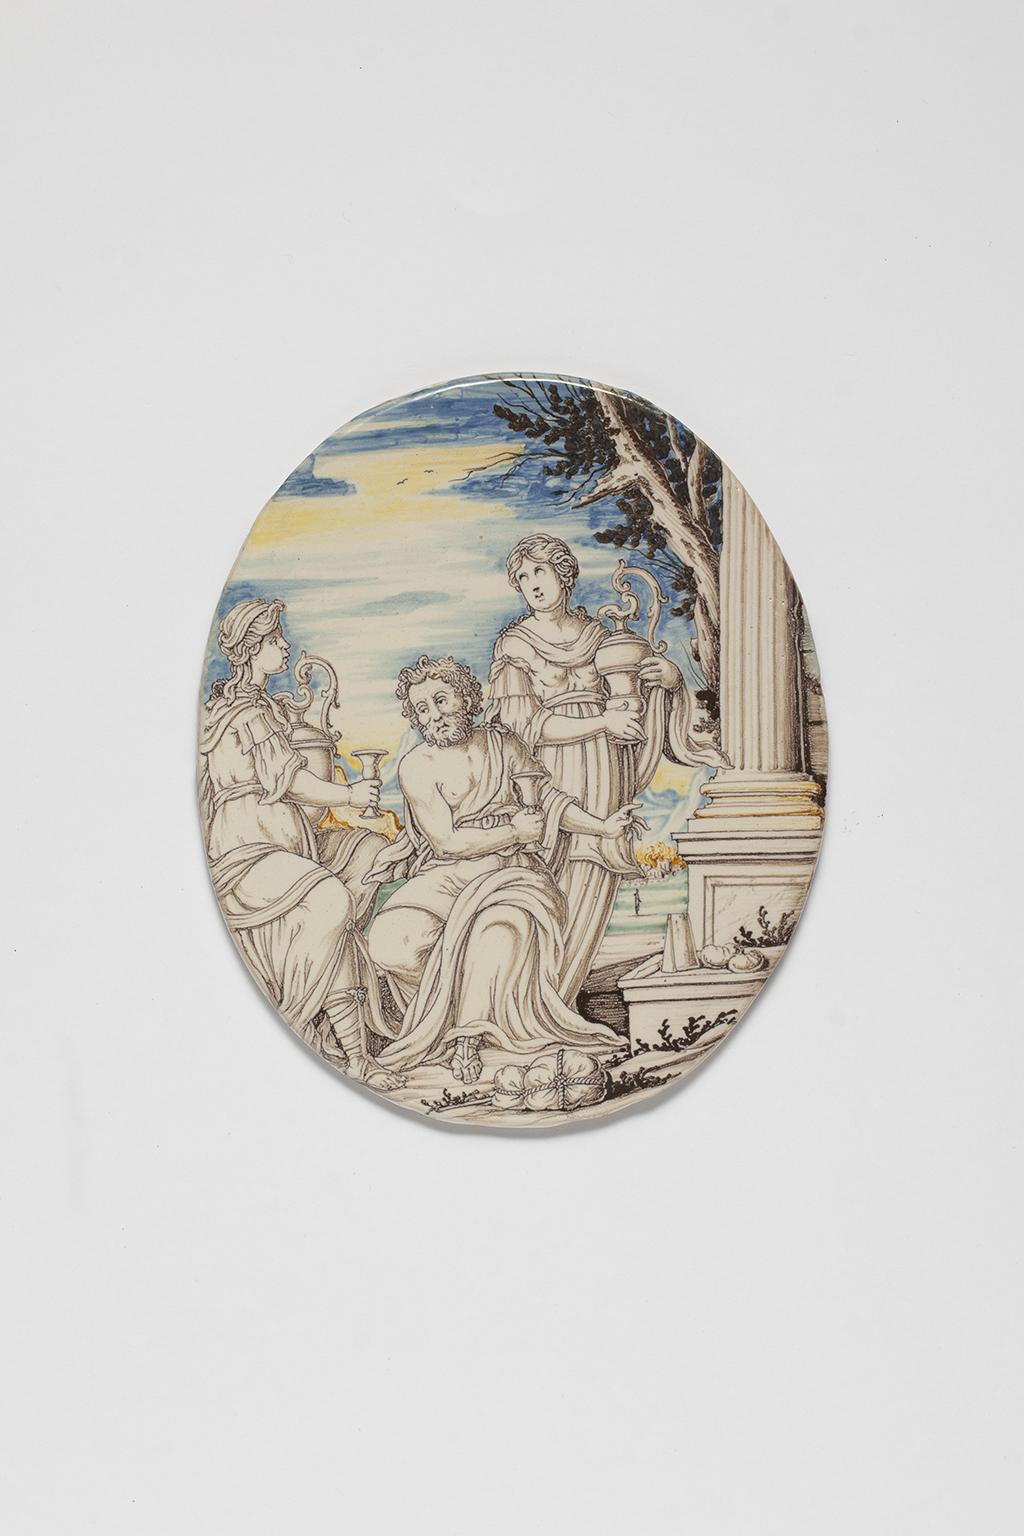 Early 18th Century Ancient Maiolica Tiles, Rampini Manufactory, Pavia, 1693-1704 For Sale